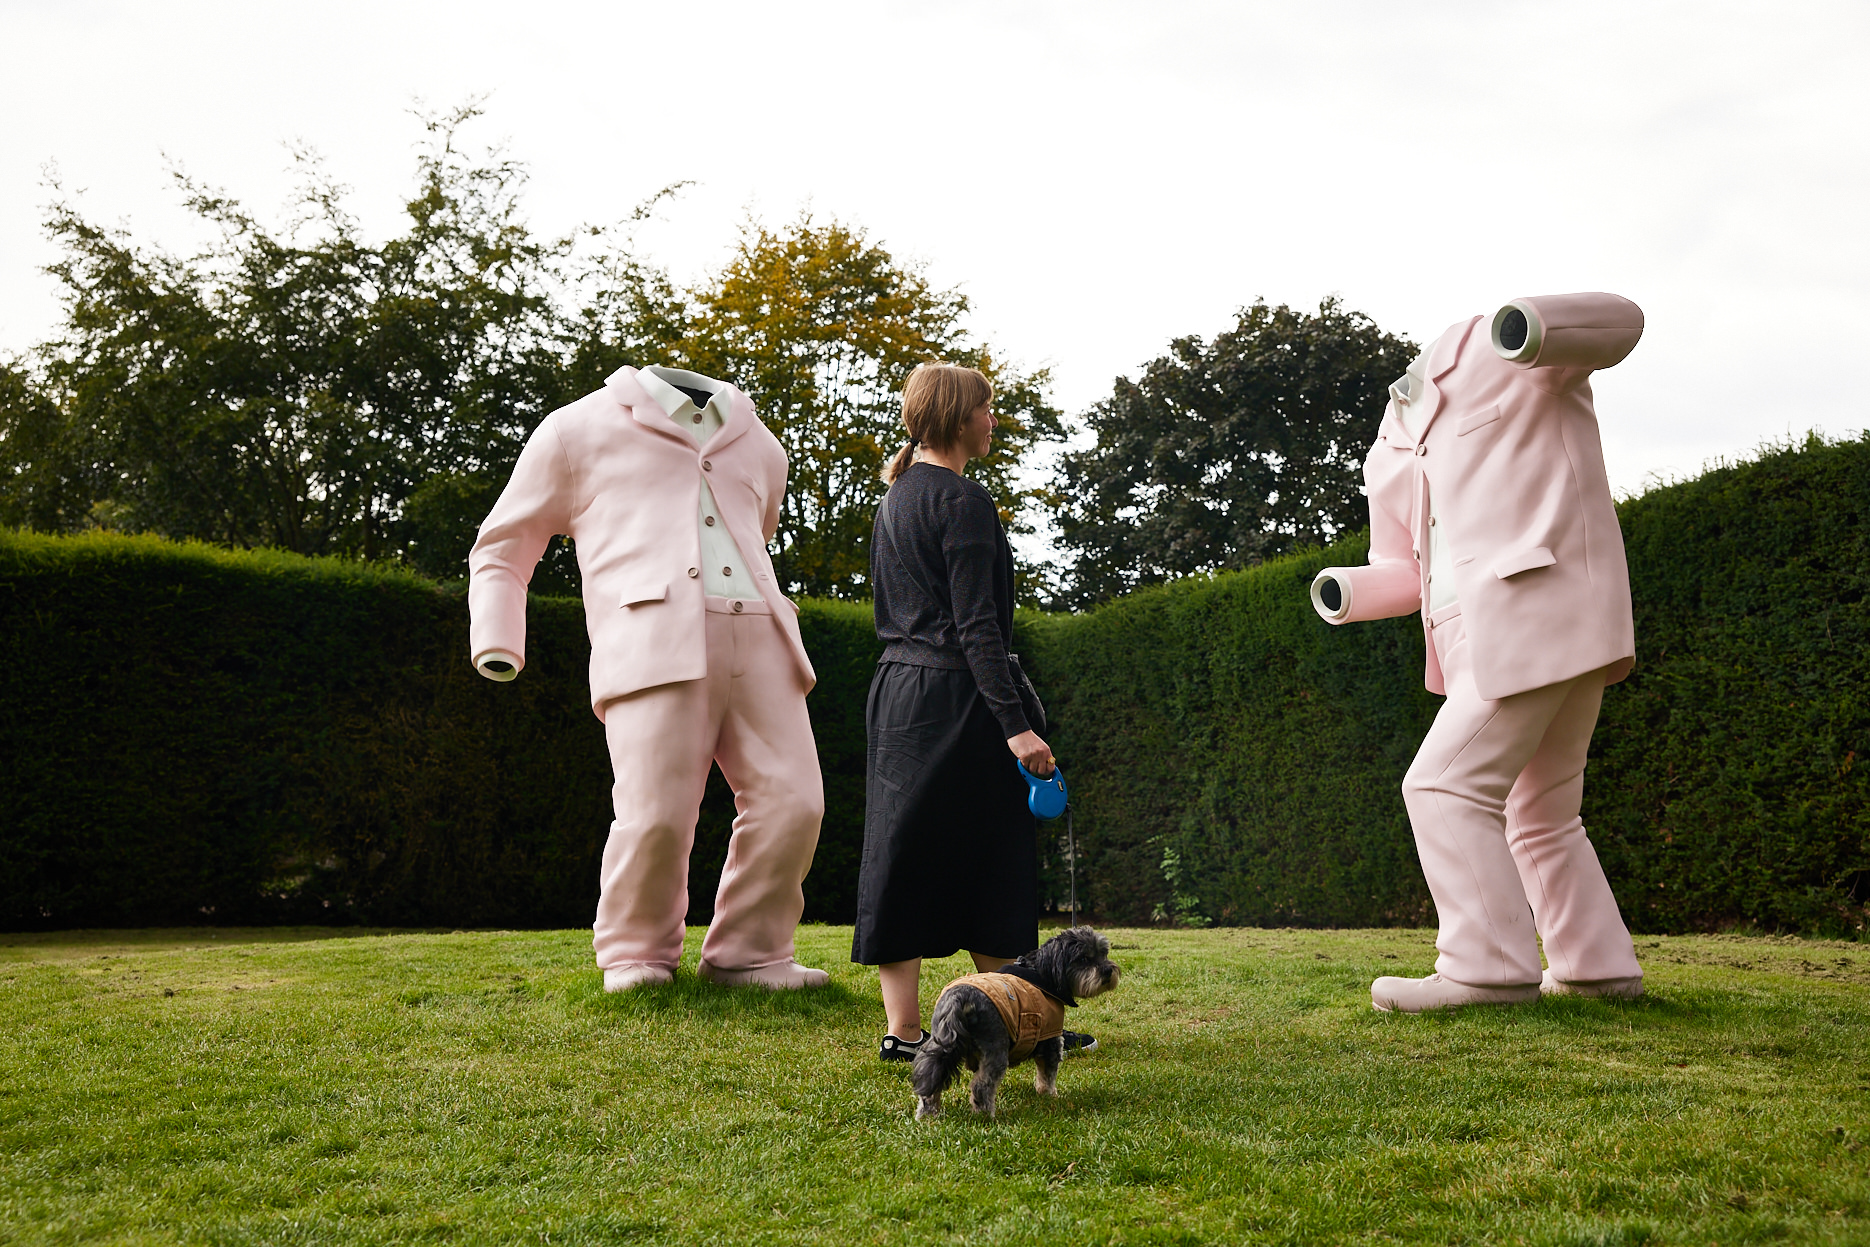 A woman walking a small dog looking at two giant pink suit sculptures.